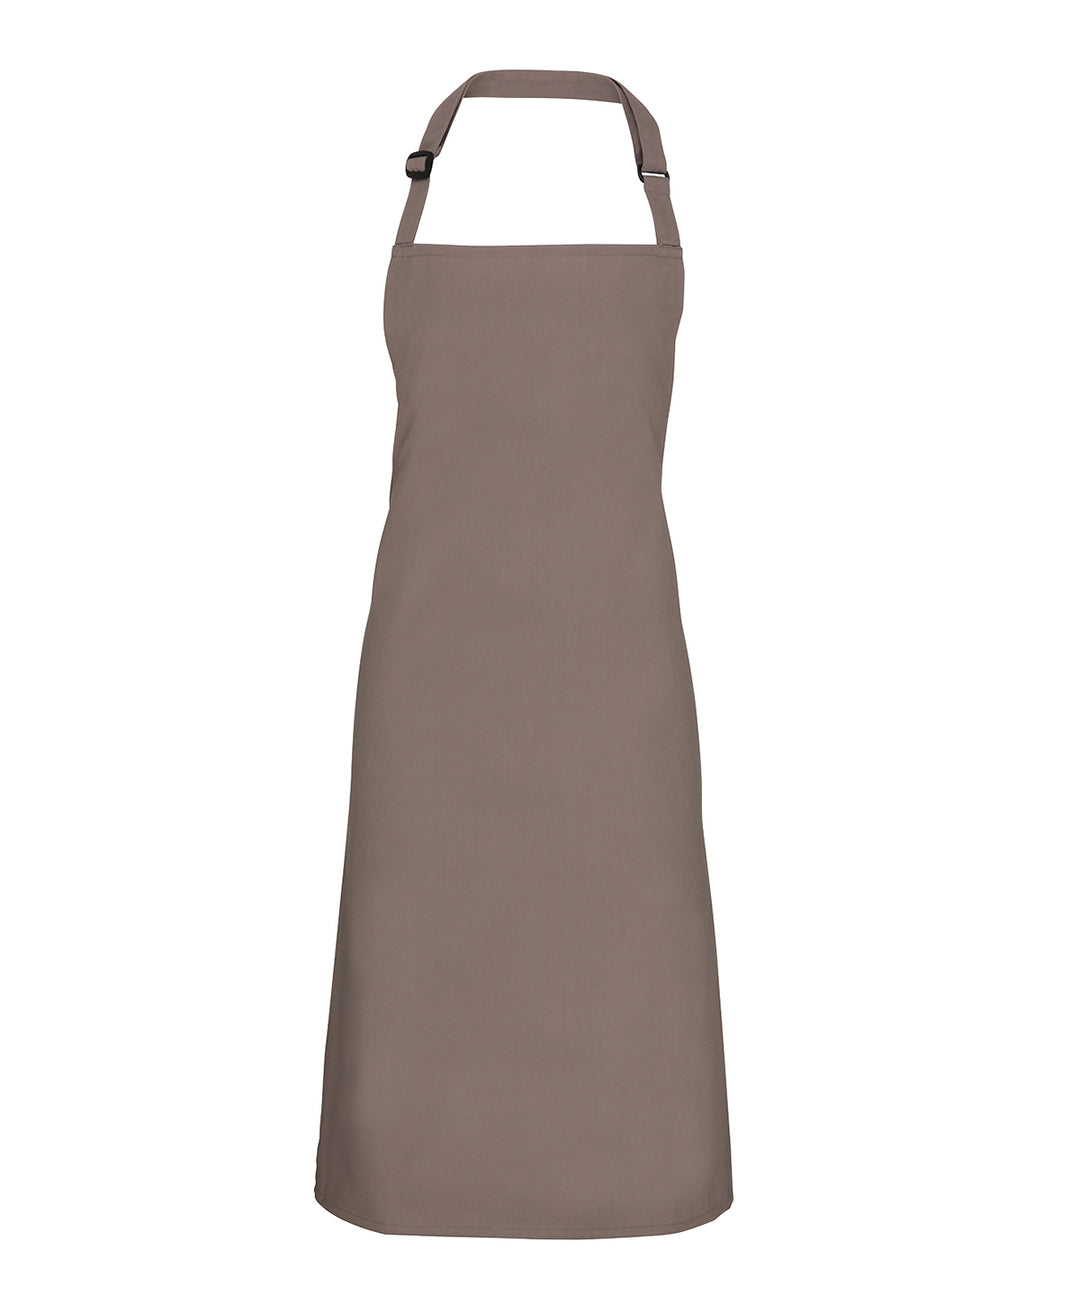 a brown apron with straps on a white background